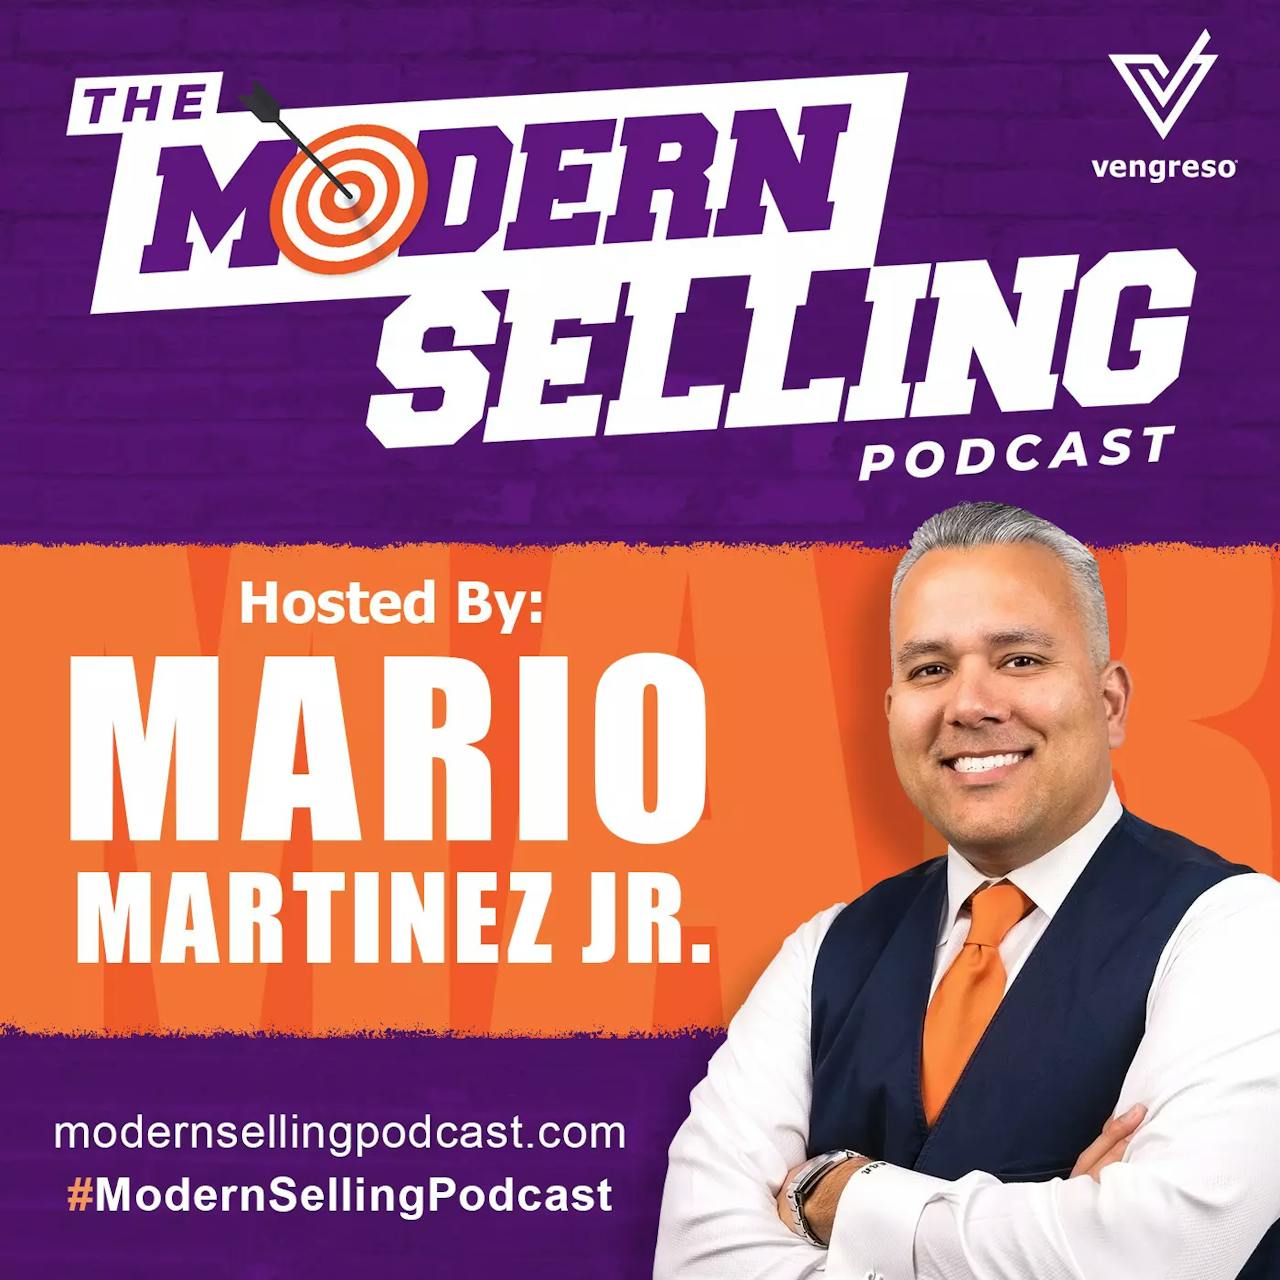 Best Sales Podcasts: The Modern Selling Podcast